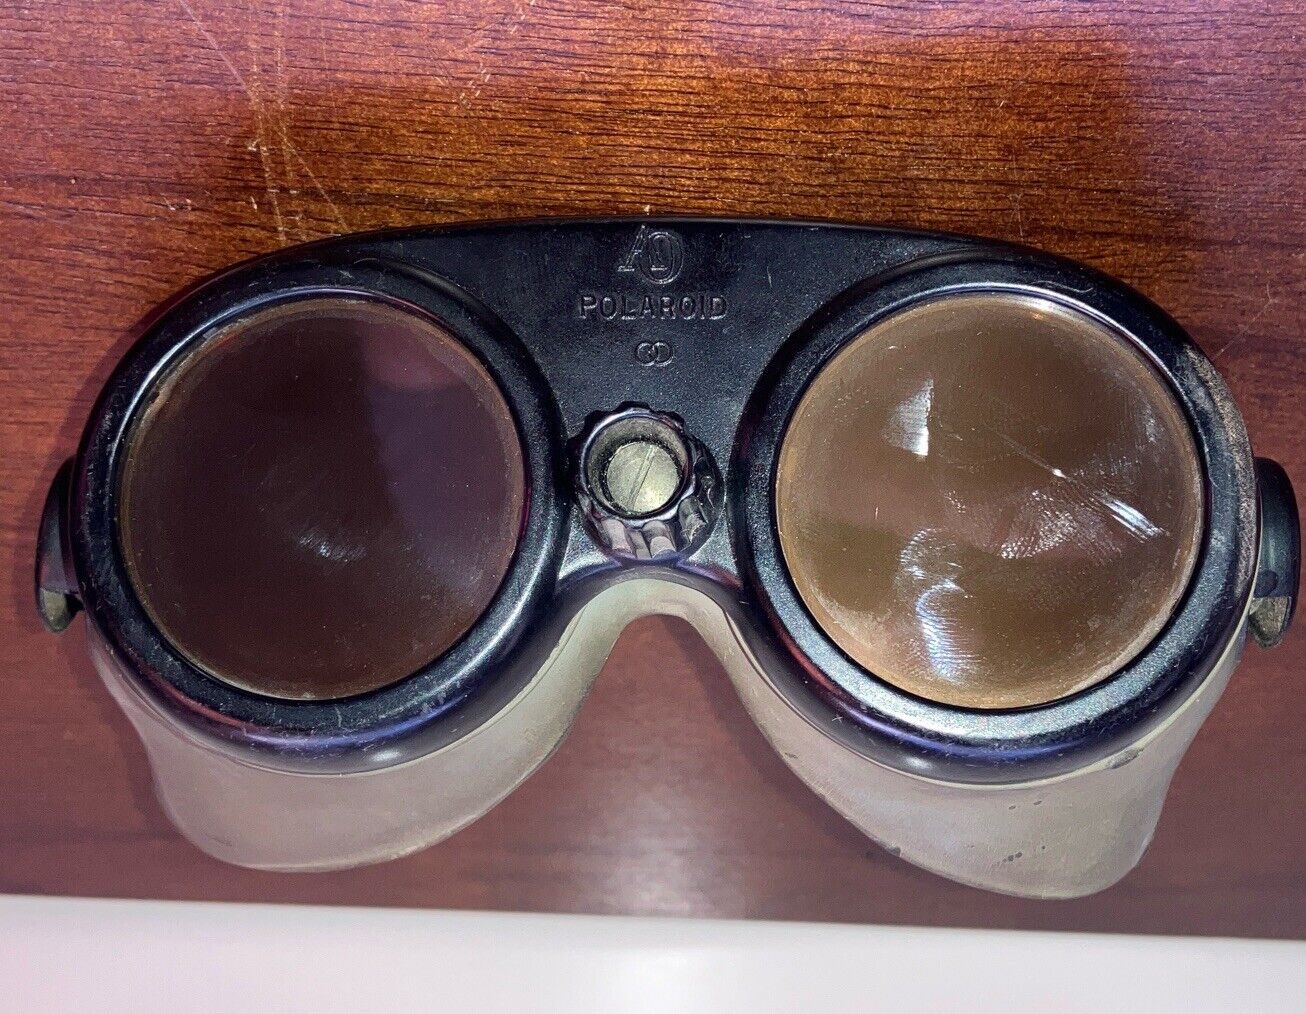 RARE VINTAGE WWII POLAROID GOGGLES US MILITARY?? changeable lens knob type LOOK*